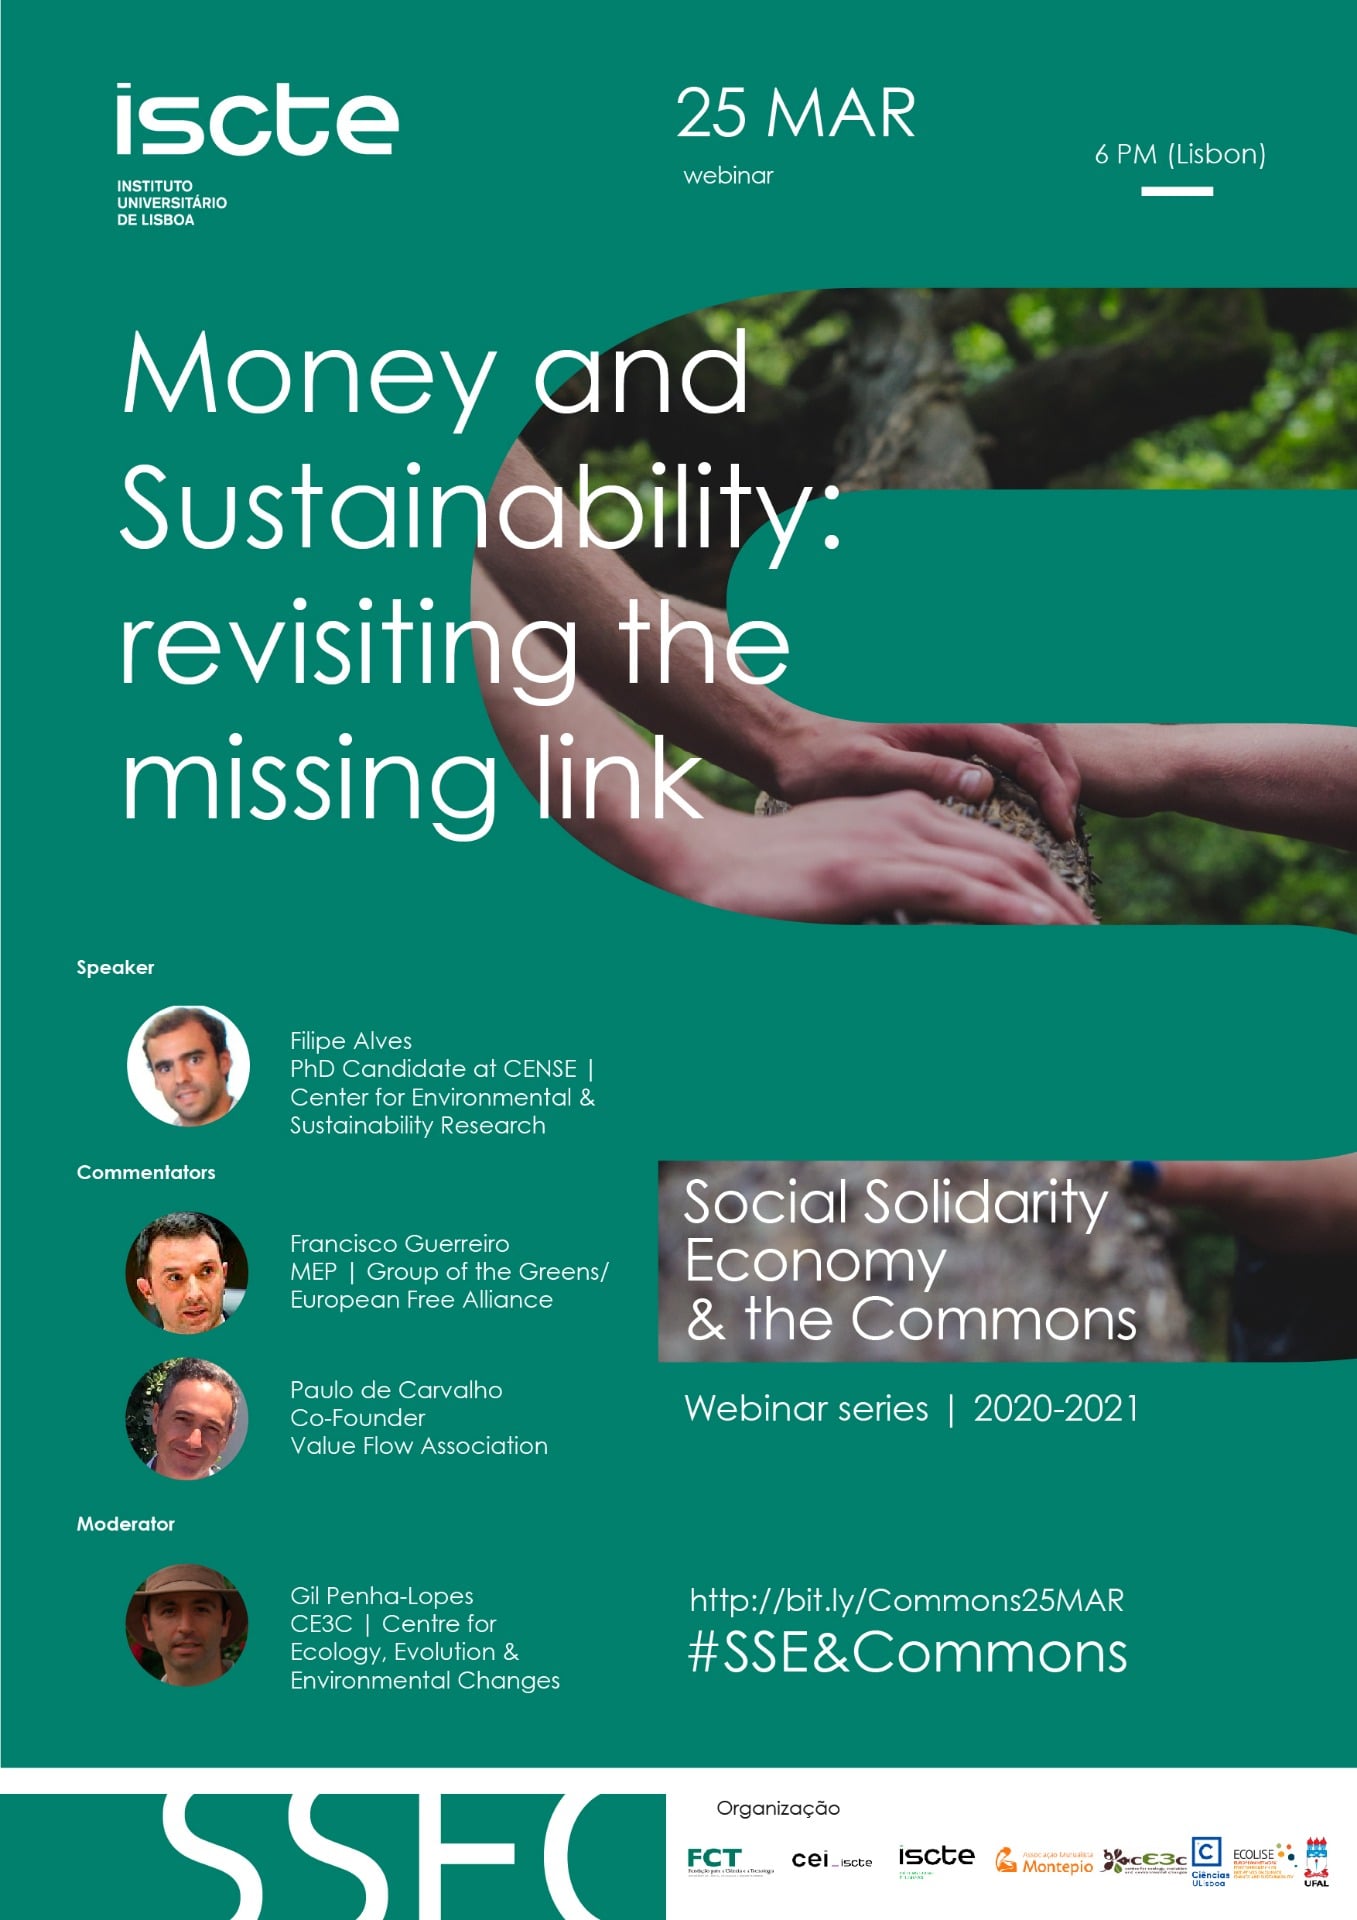 Webinar: Money and Sustainability, revisiting the missing link